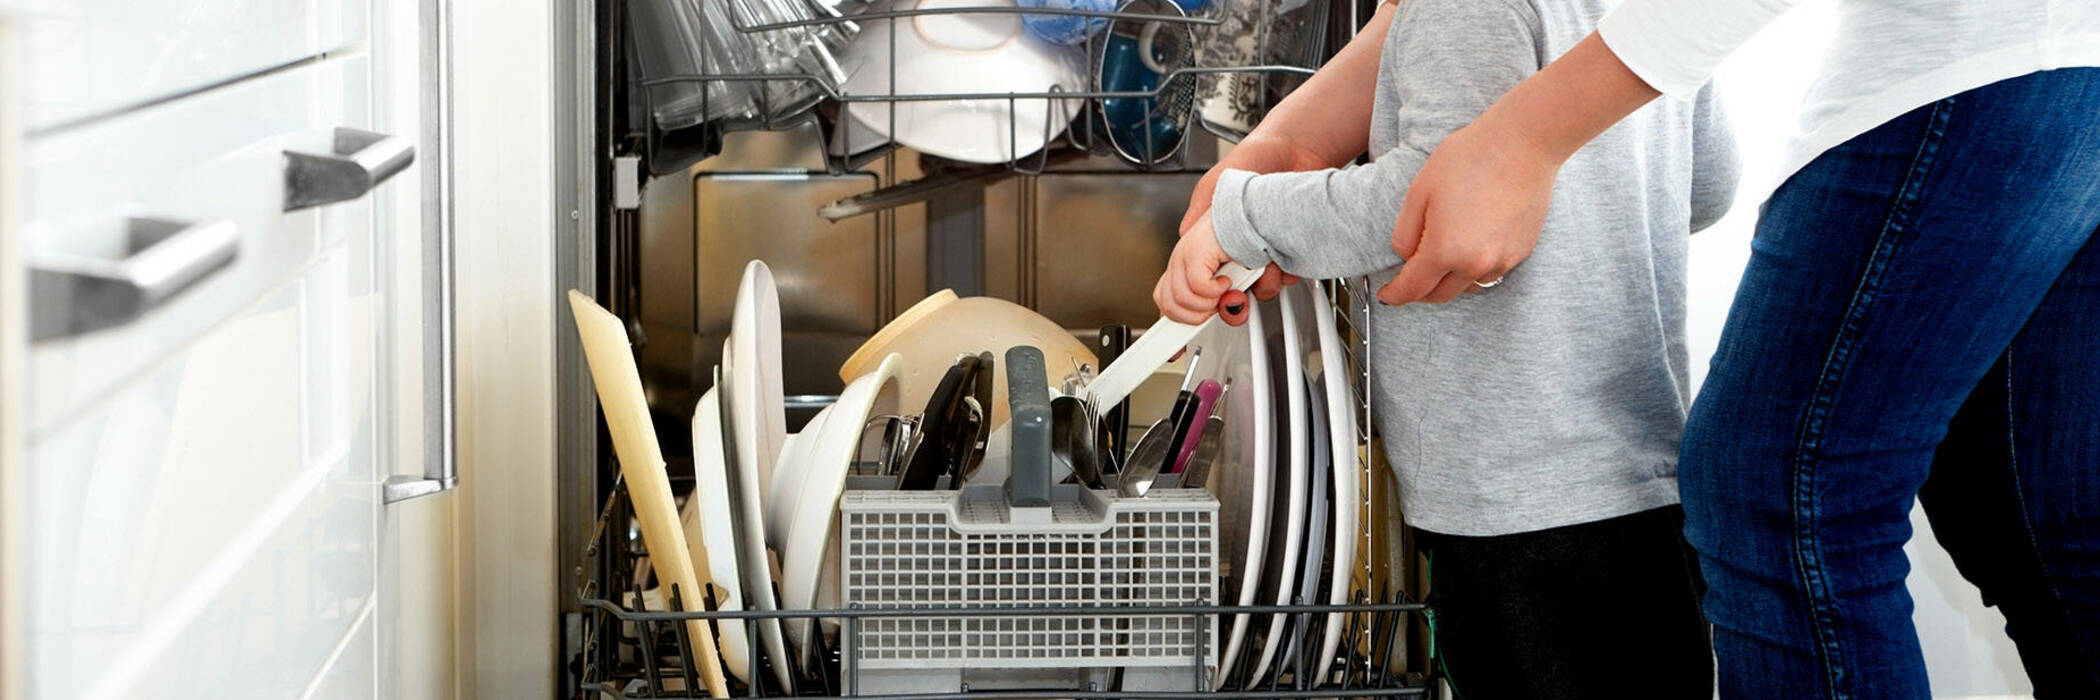 What Not To Put In A Dishwasher, According To Experts